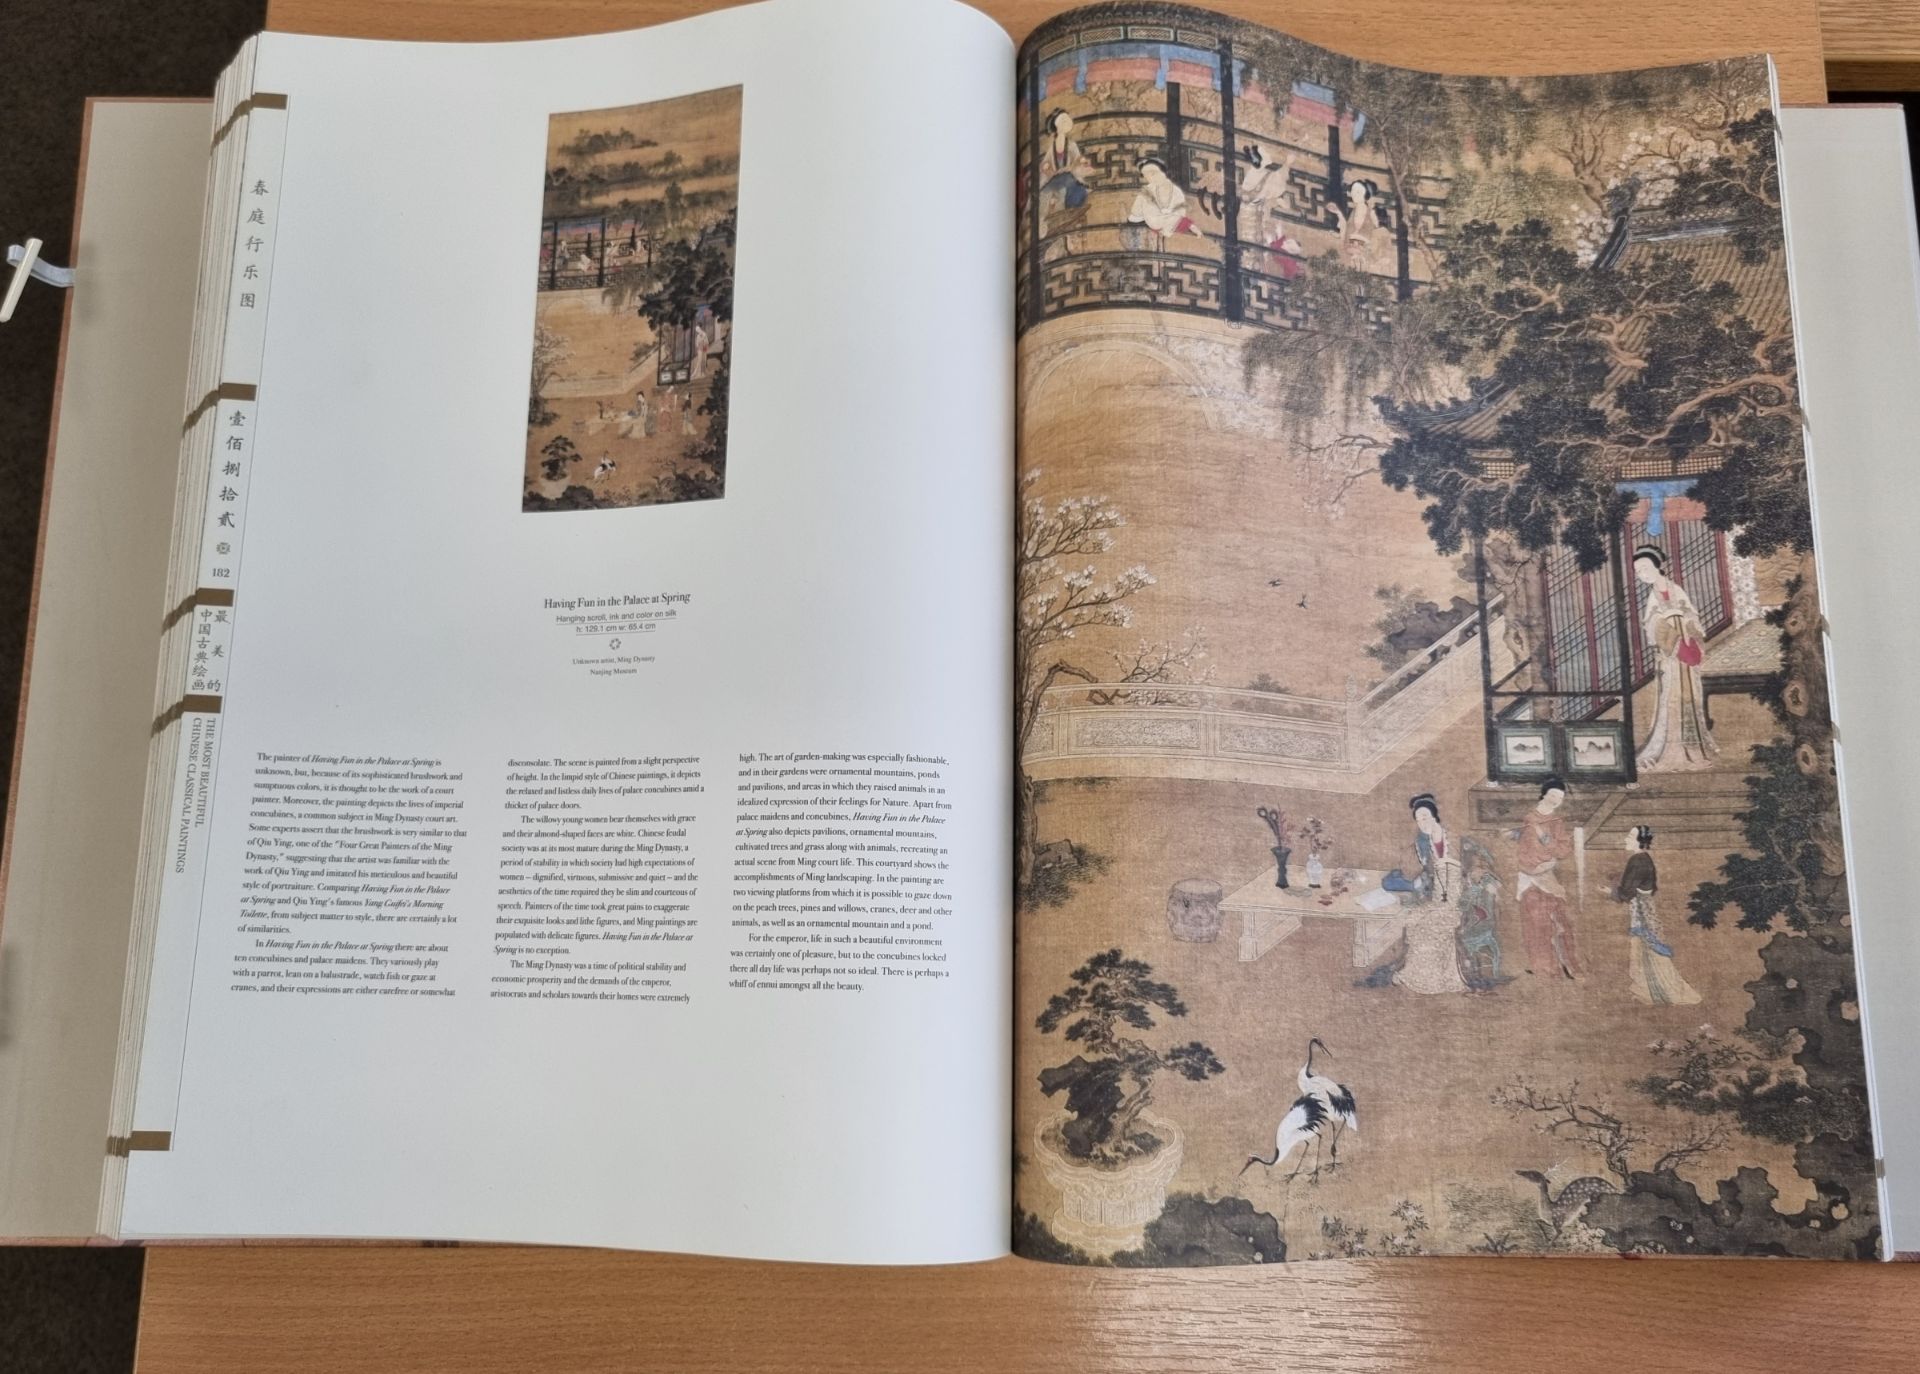 The Most beautiful Chinese classical paintings hardcover book - Image 5 of 7